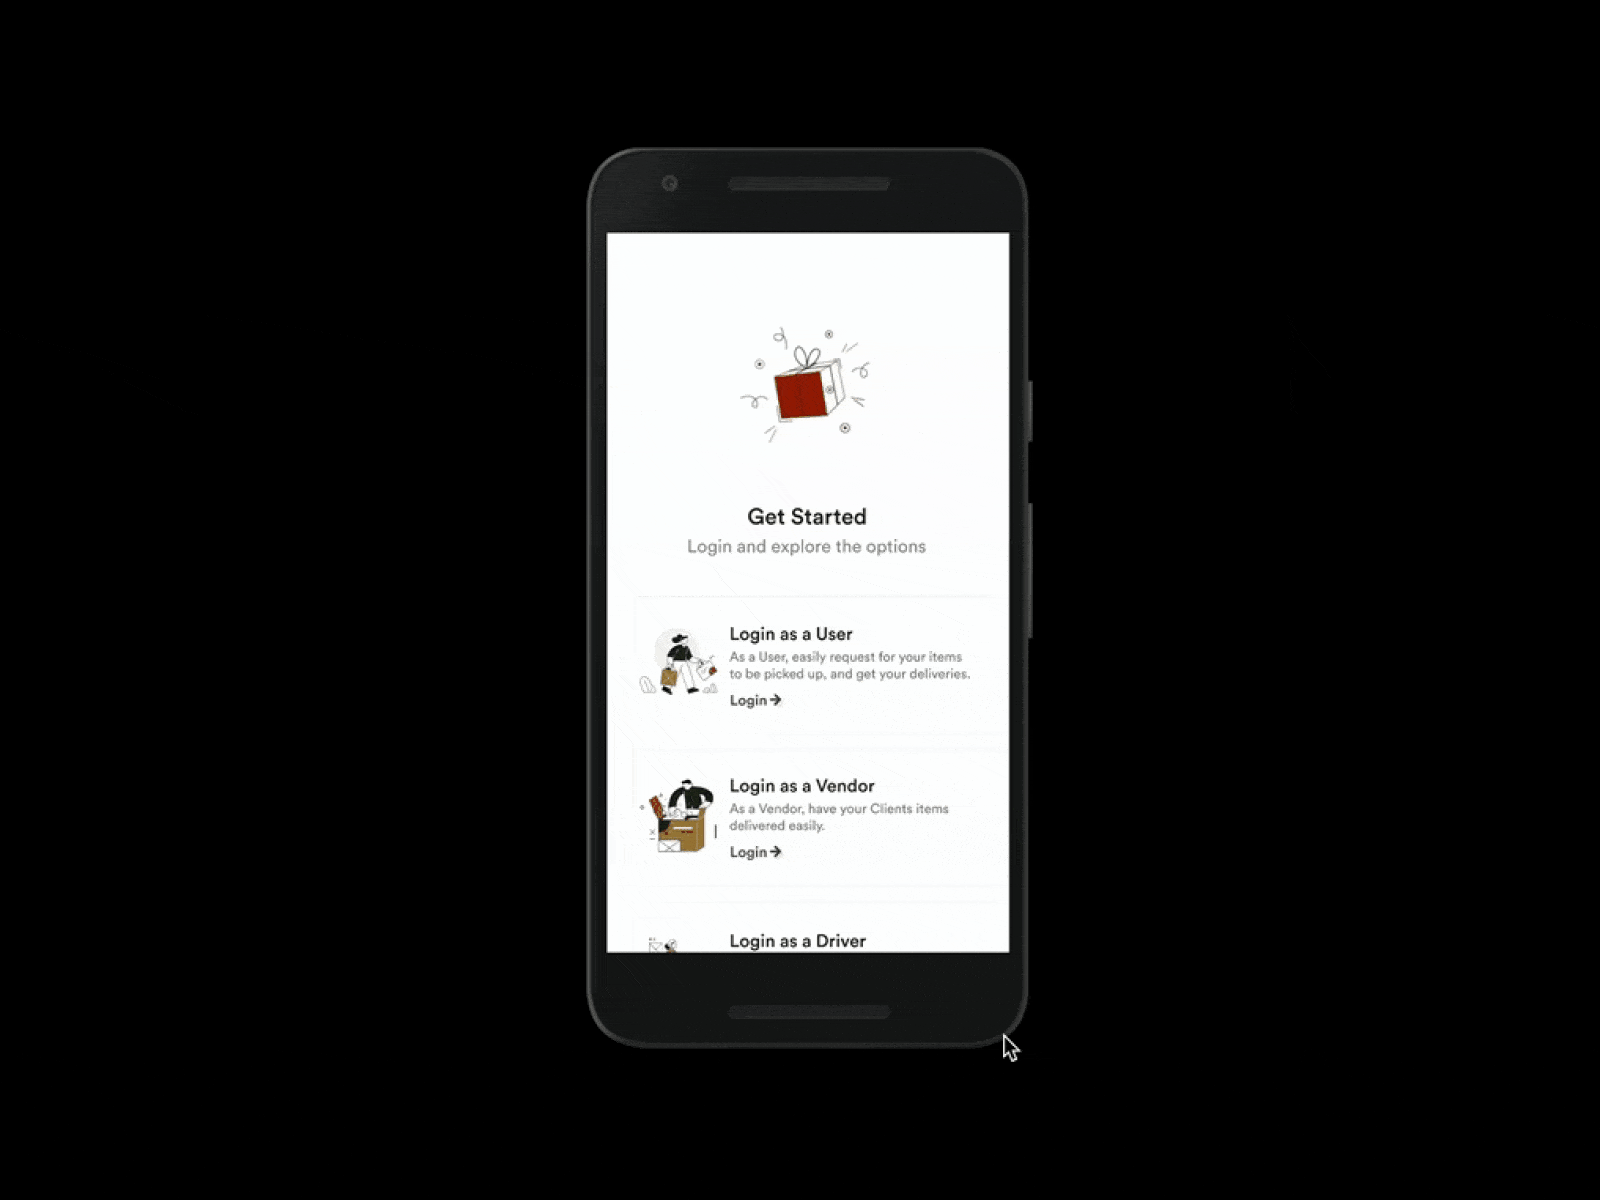 A Delivery App idea from a project